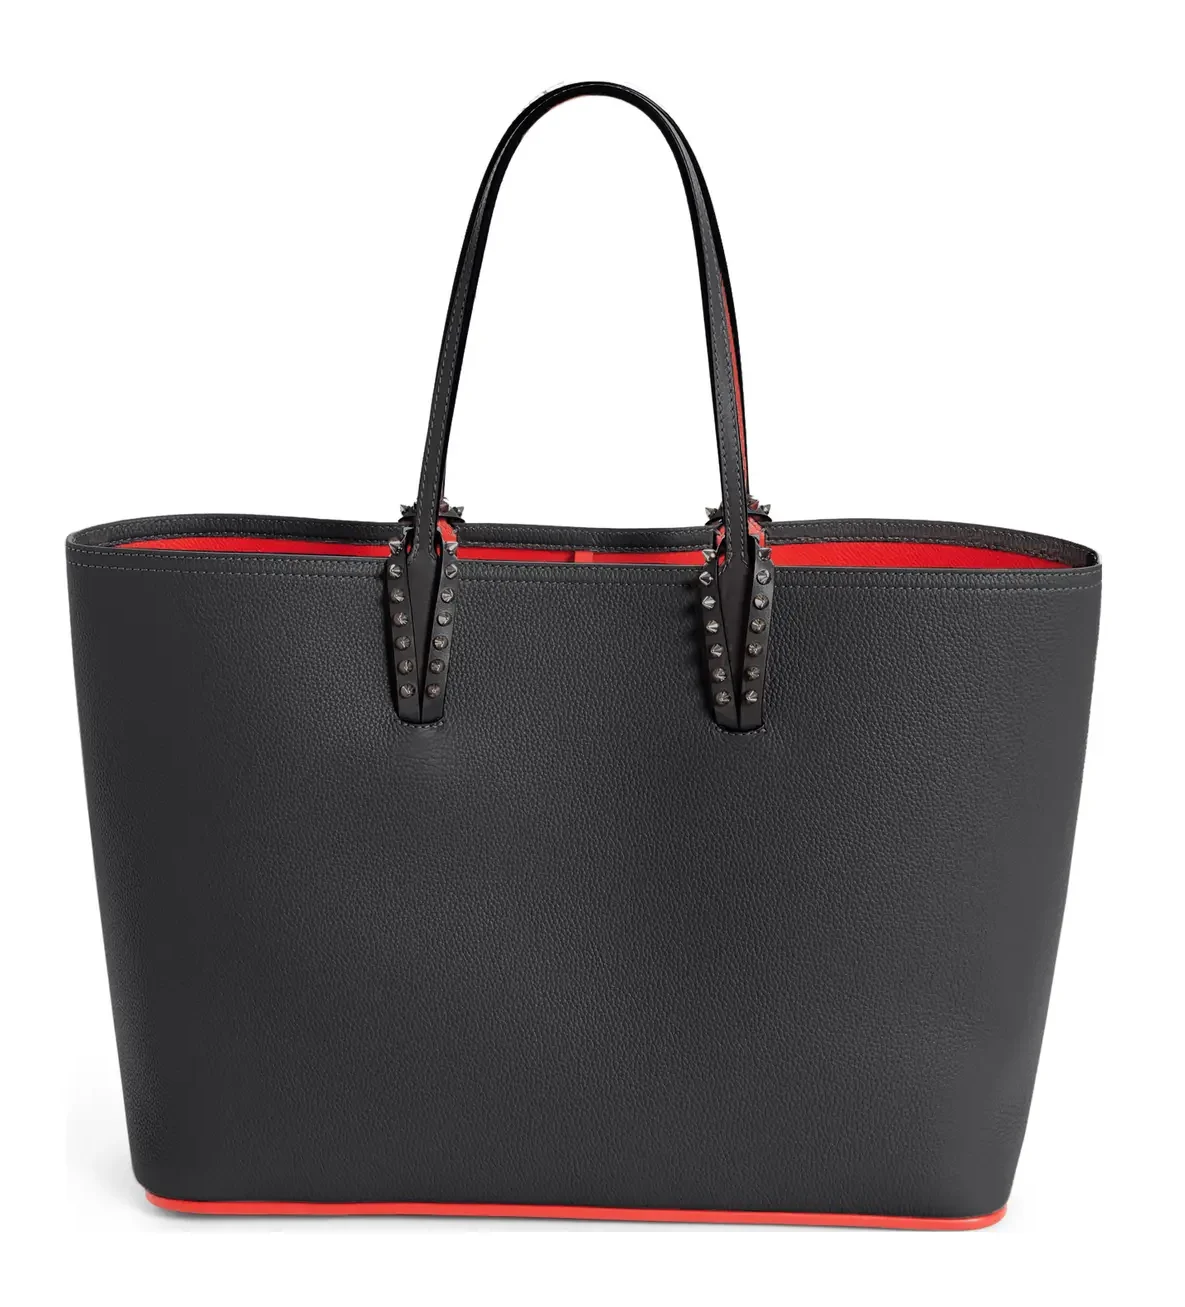 The best designer bags for laptops: Cabata Calfskin Leather Tote